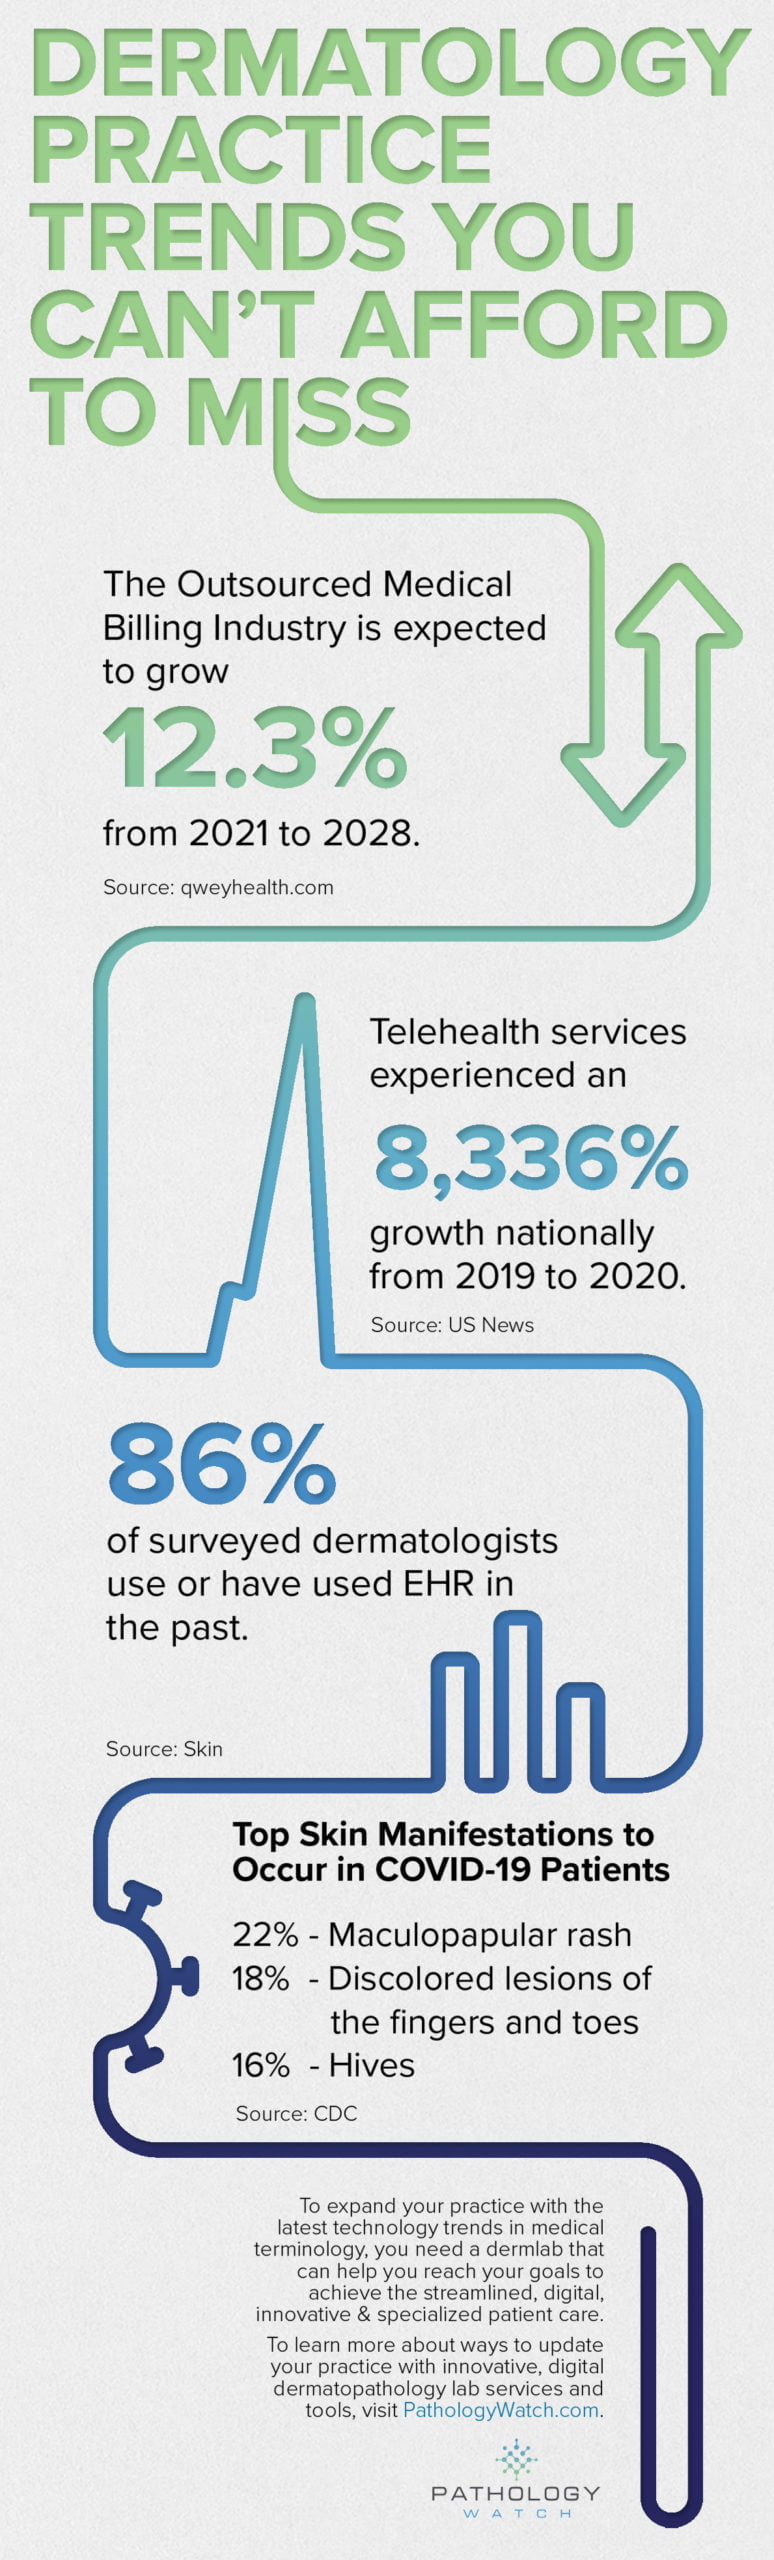 Dermatology Trends Infographic